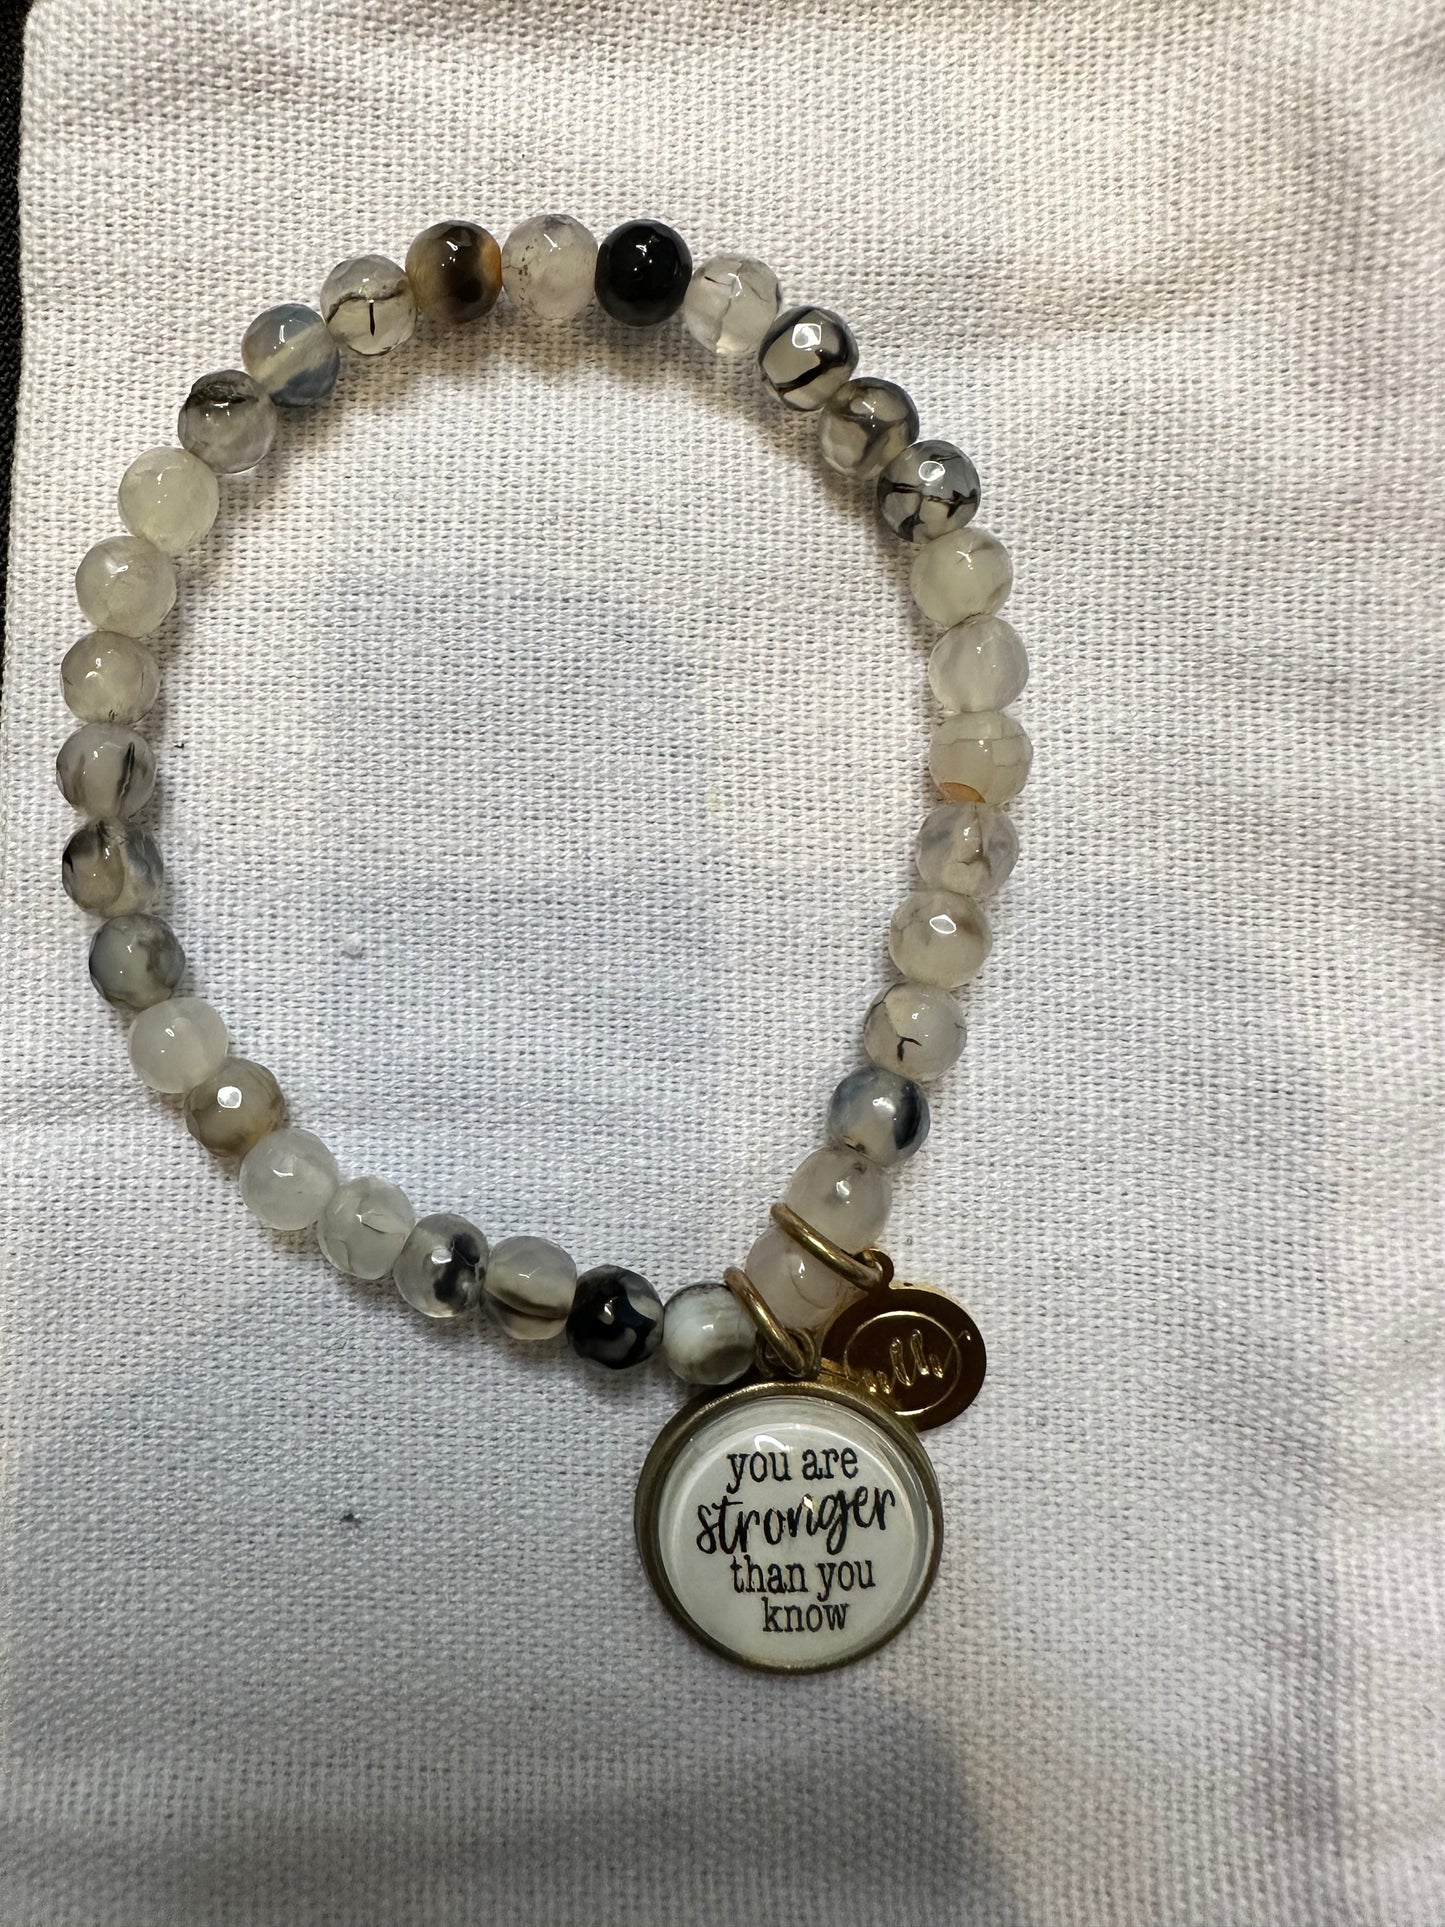 Sentiment Bracelet-You are stronger than you know